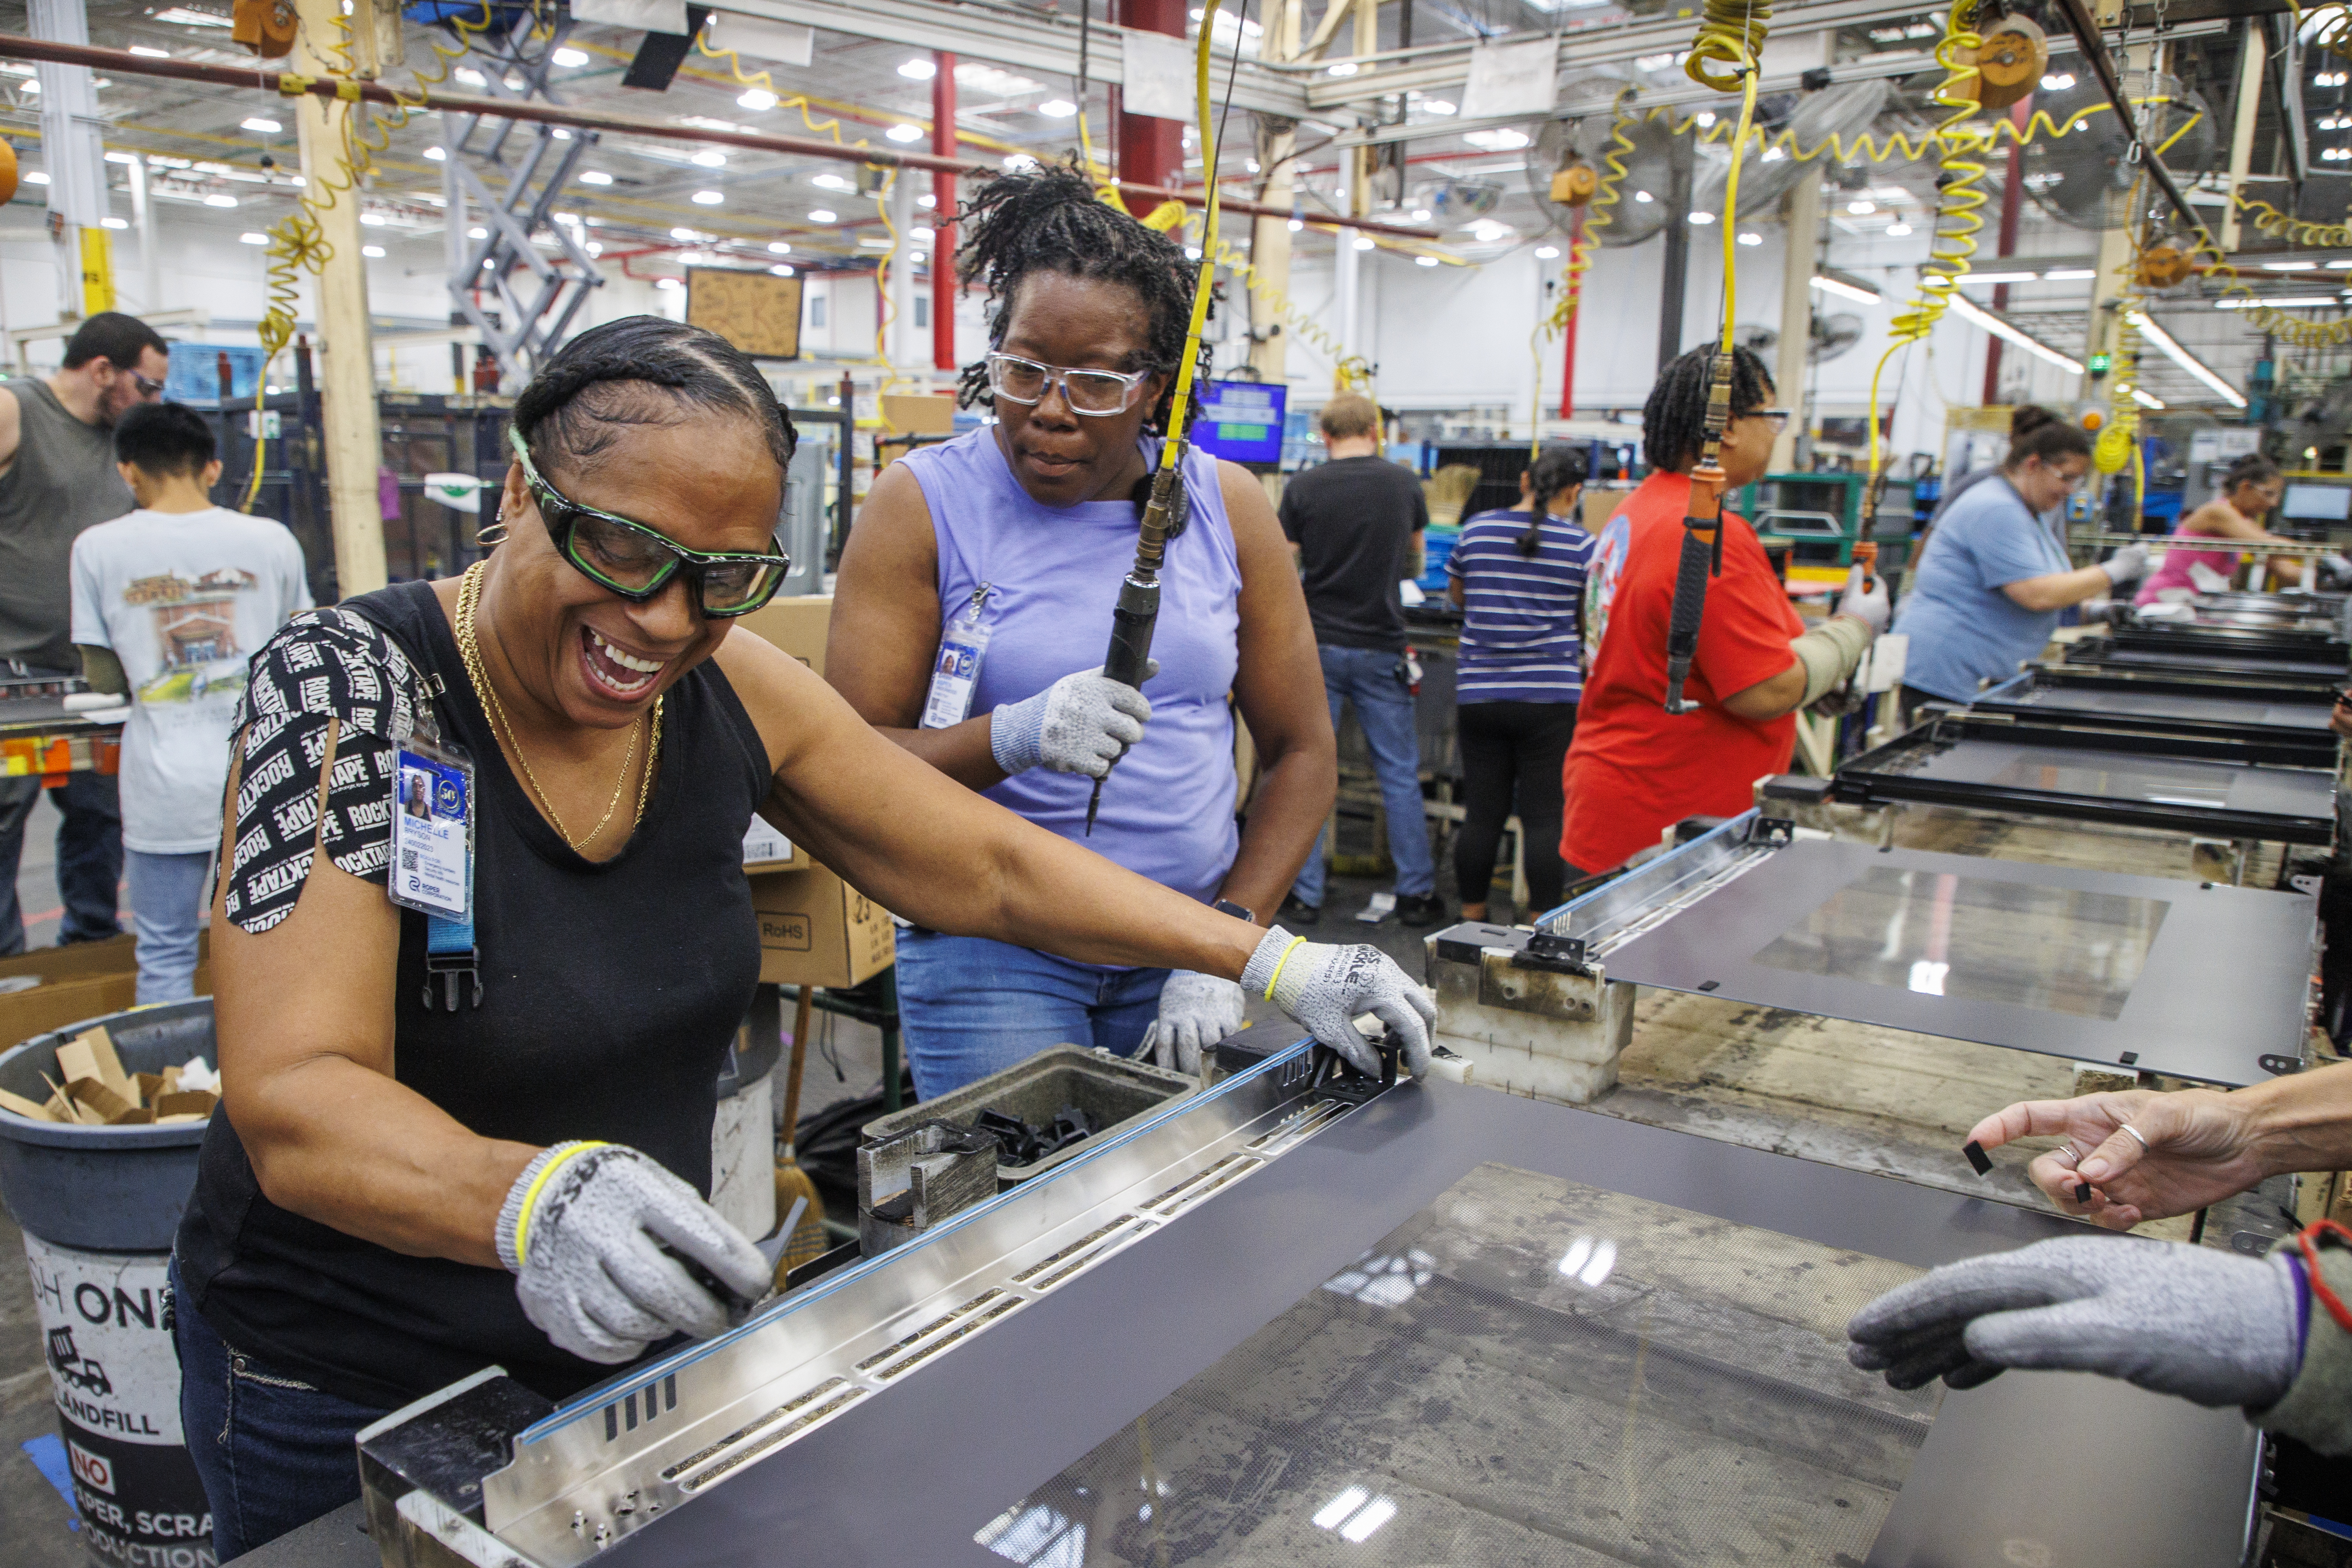 Two women smile as they work on the assembly line